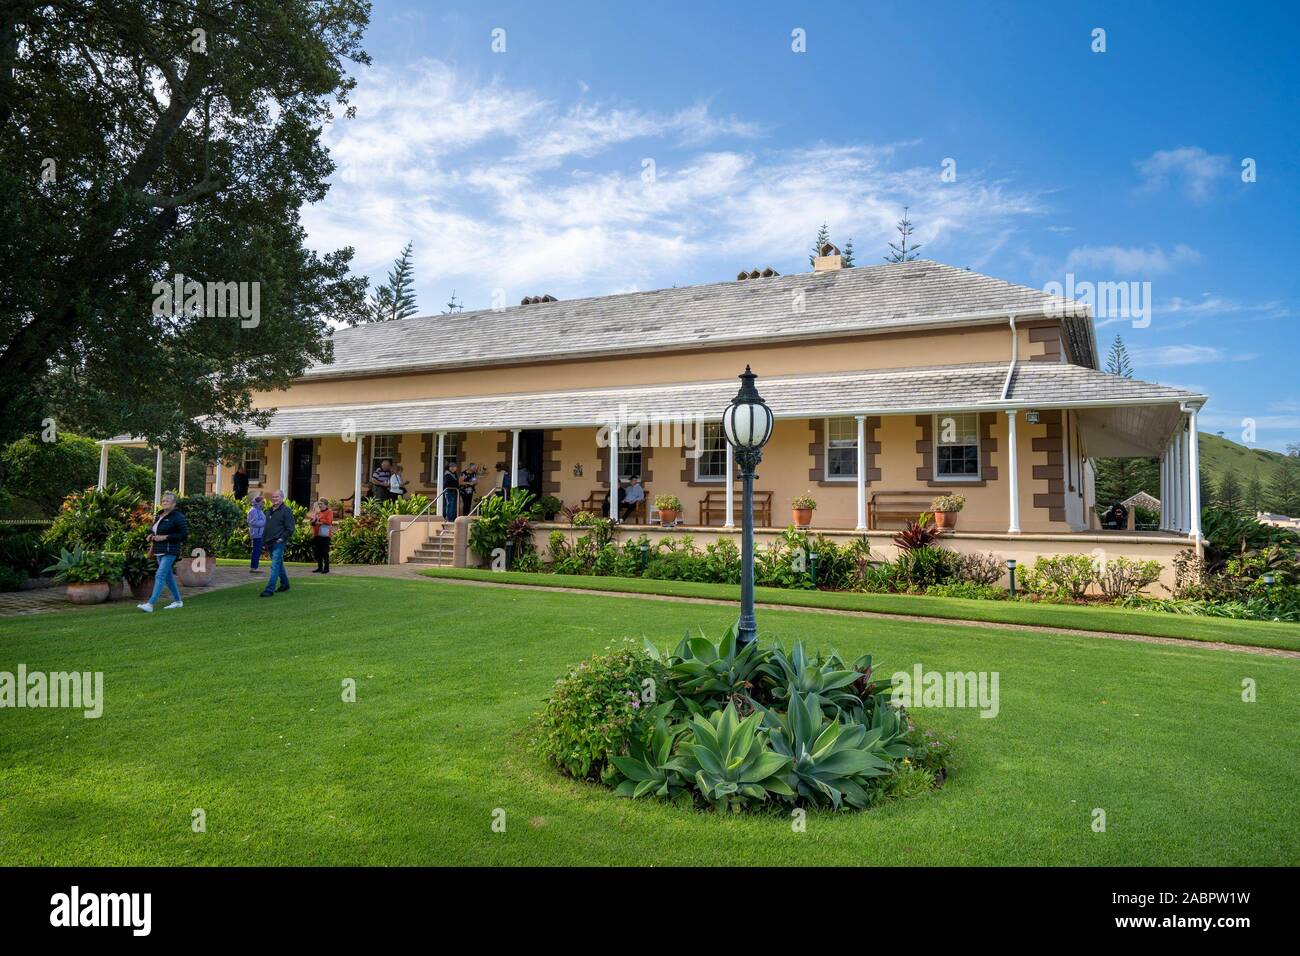 Government House in Kingston and Arthur’s Vale Historic Area, built in 1829. The precinct is one of the eleven sites making up the Australian Convict Stock Photo